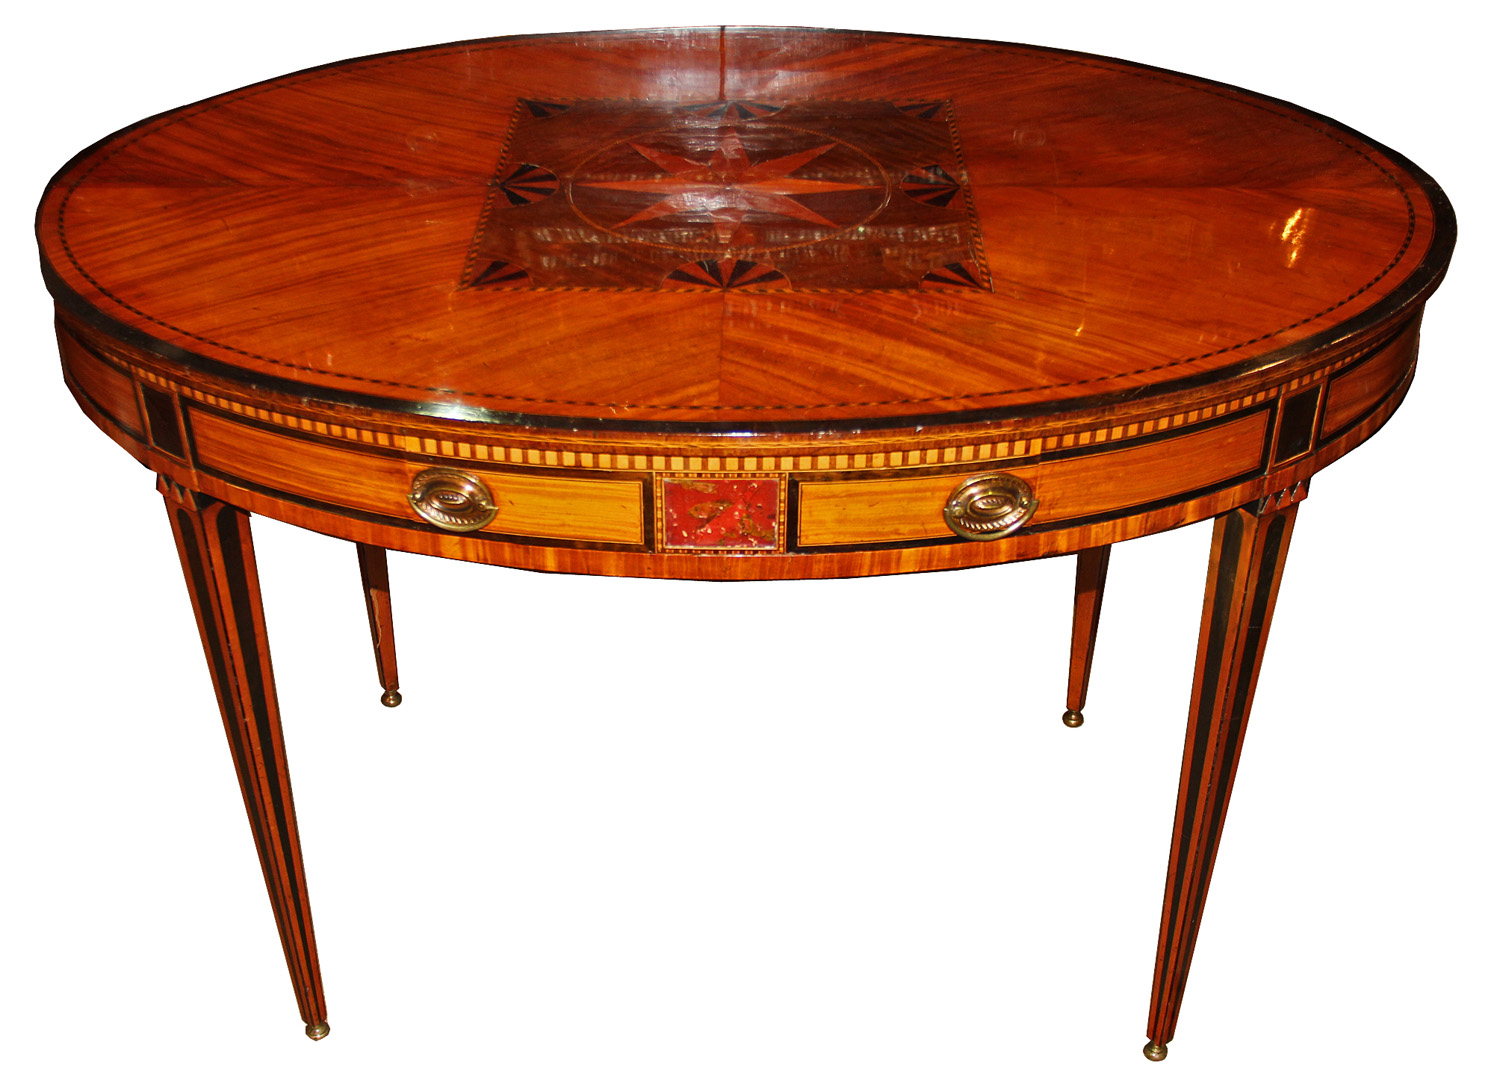 A 19th Century Satinwood, Elmwood and Ebony English Parquetry Side or Center Table No. 4464